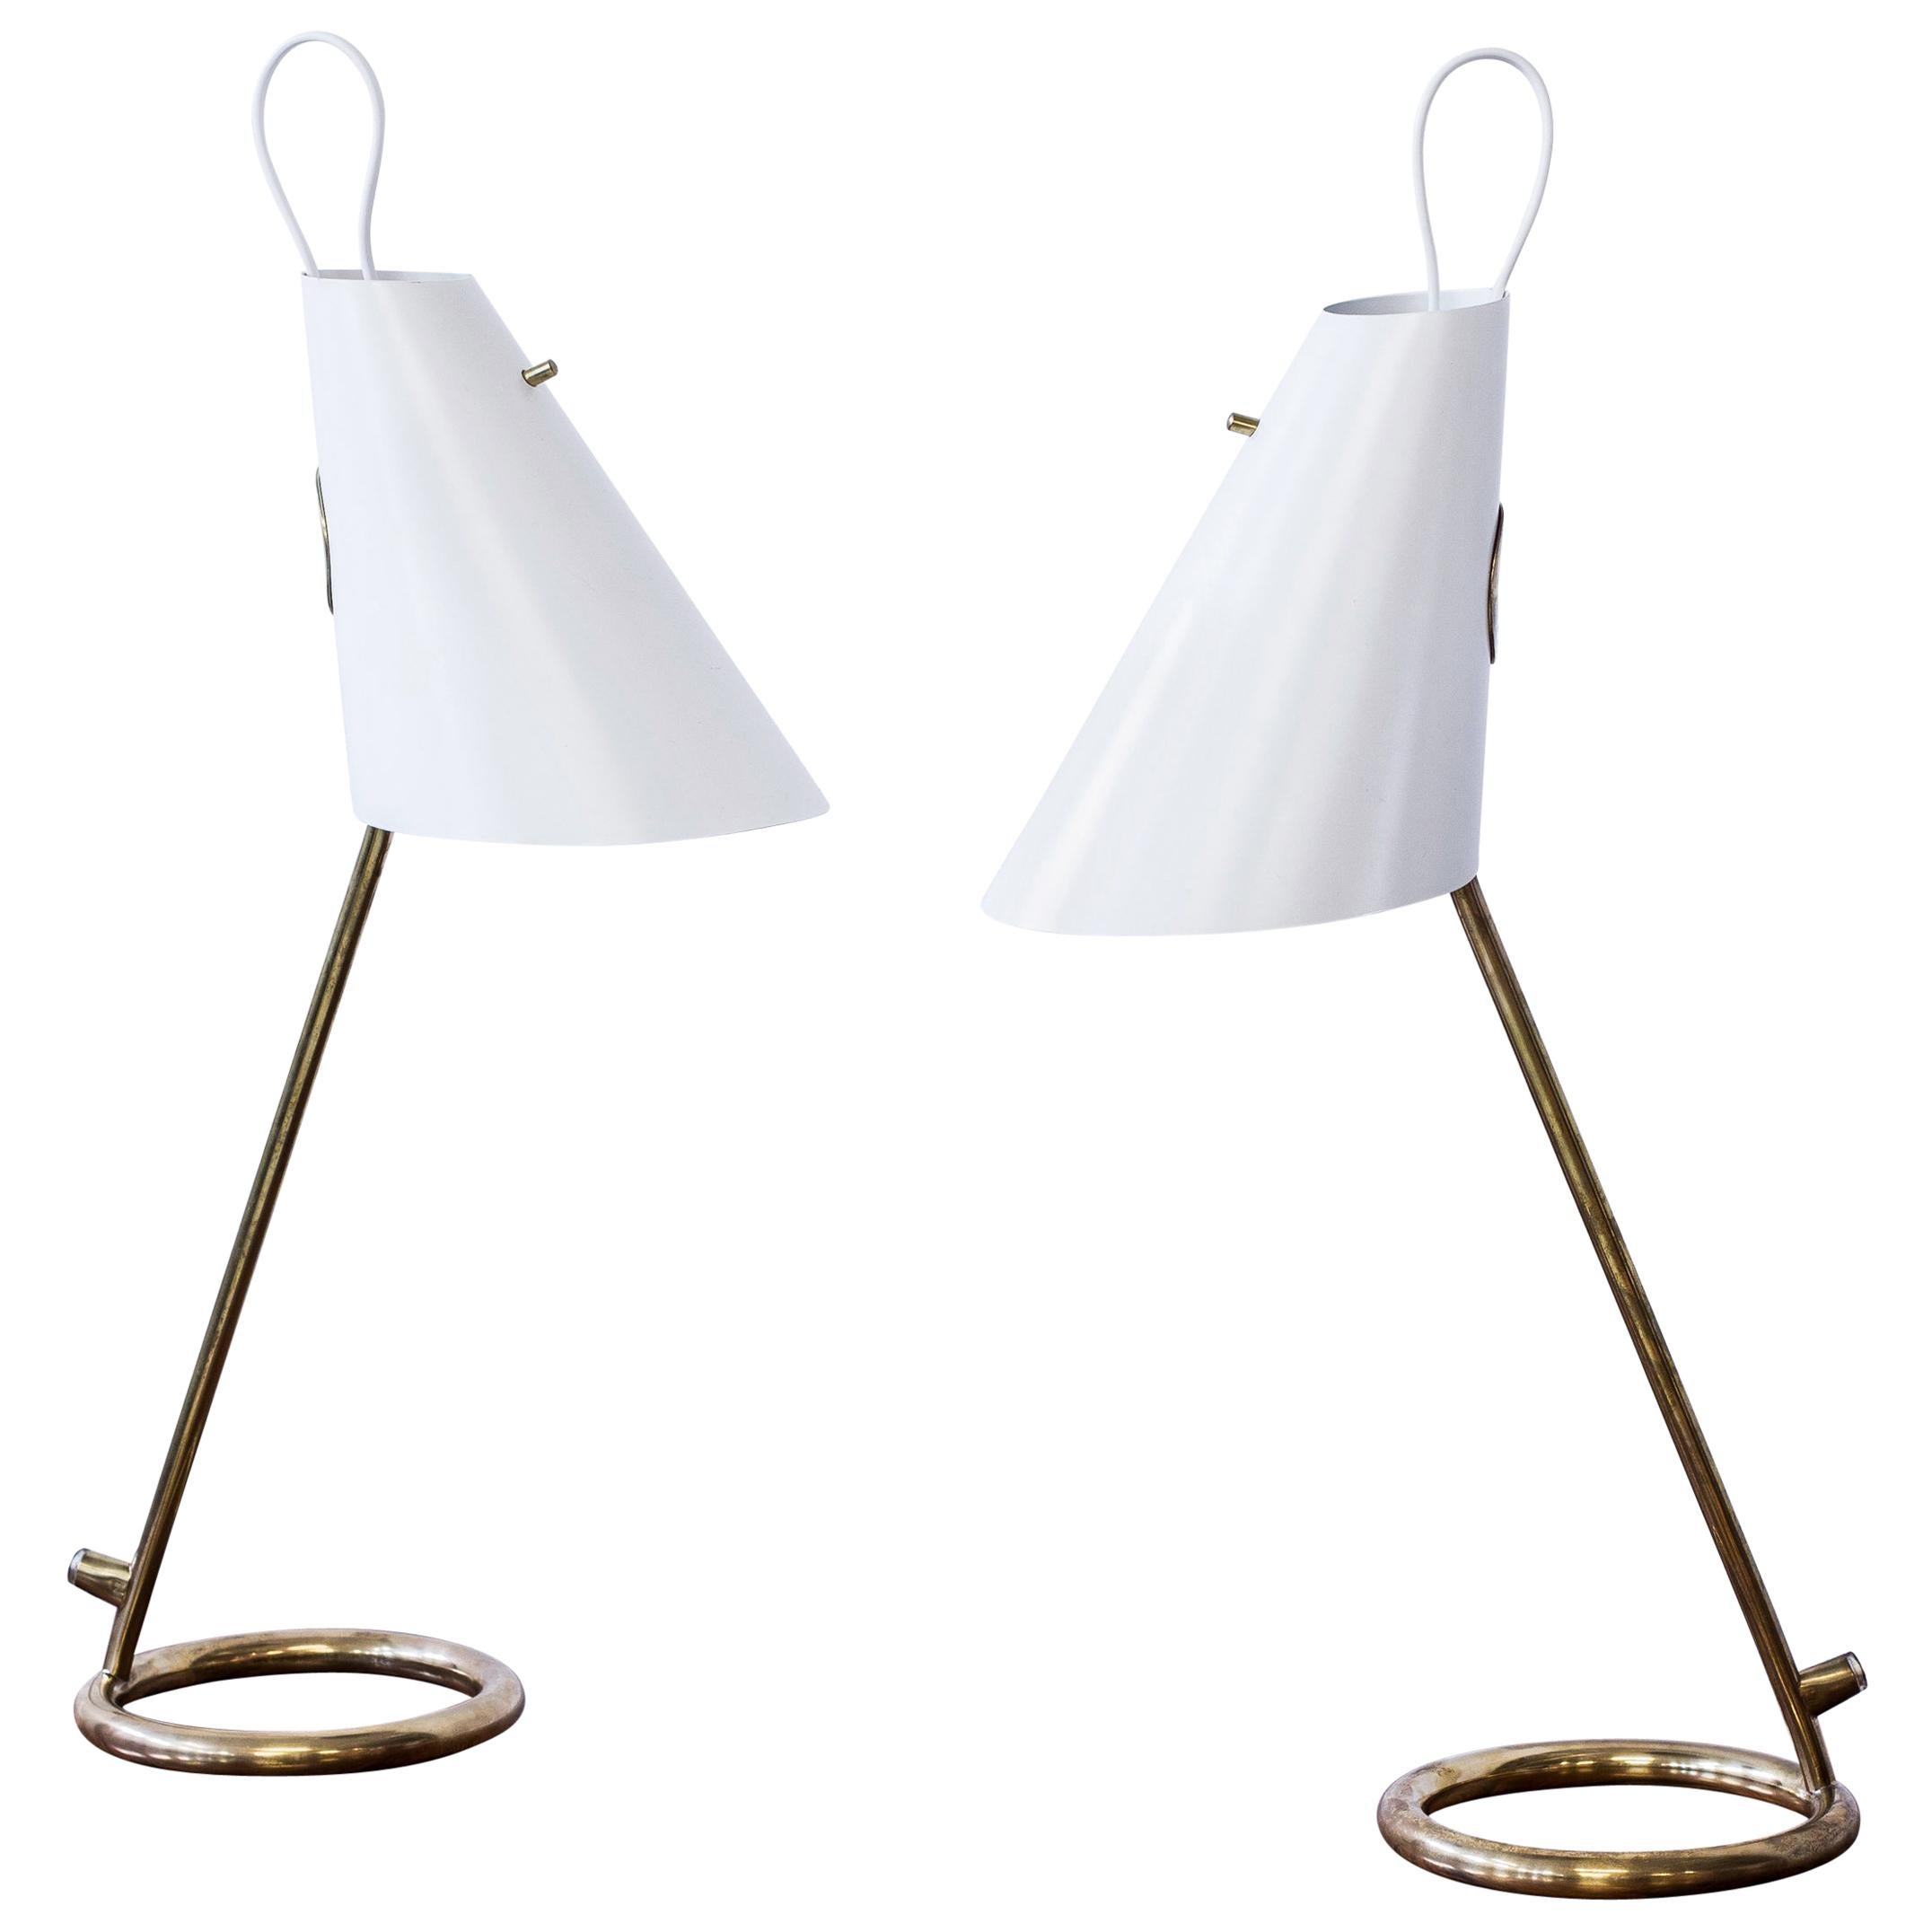 Pair of "B 90" Table Lamps by Hans-Agne Jakobsson